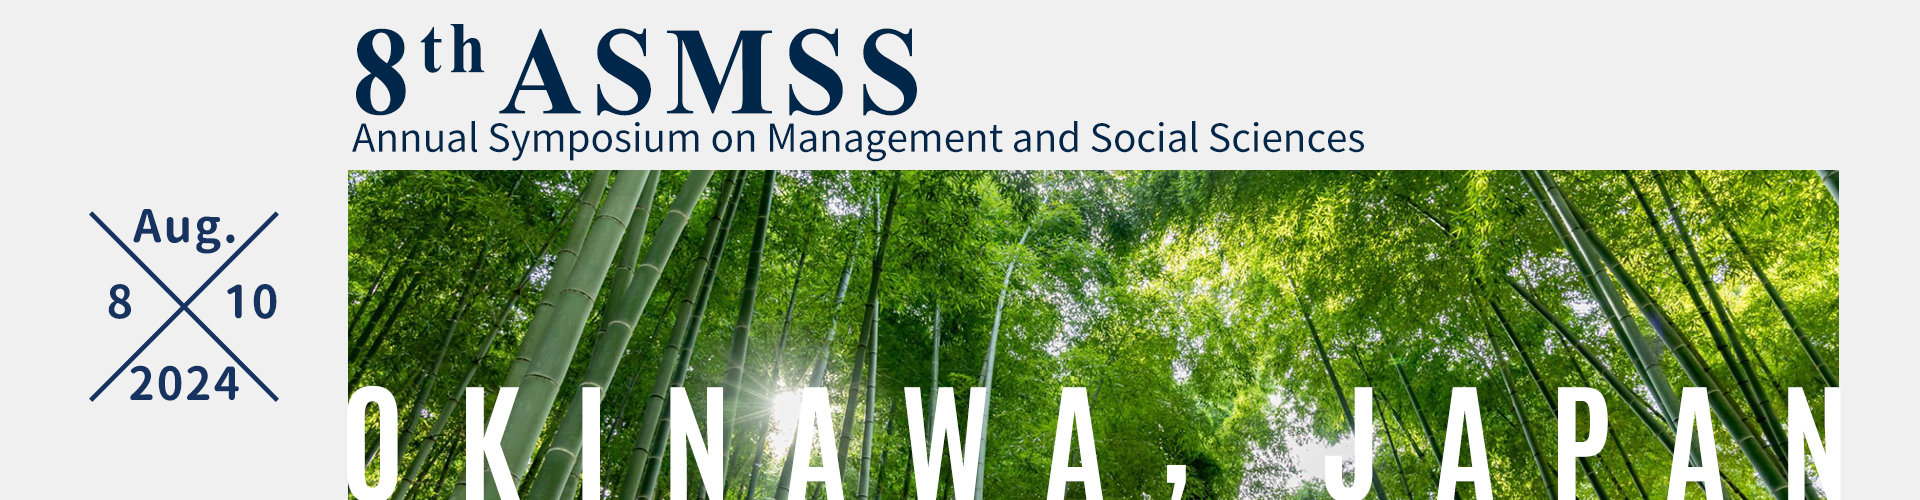 8th The Annual Symposium on Management and Social Sciences, Okinawa, Japan